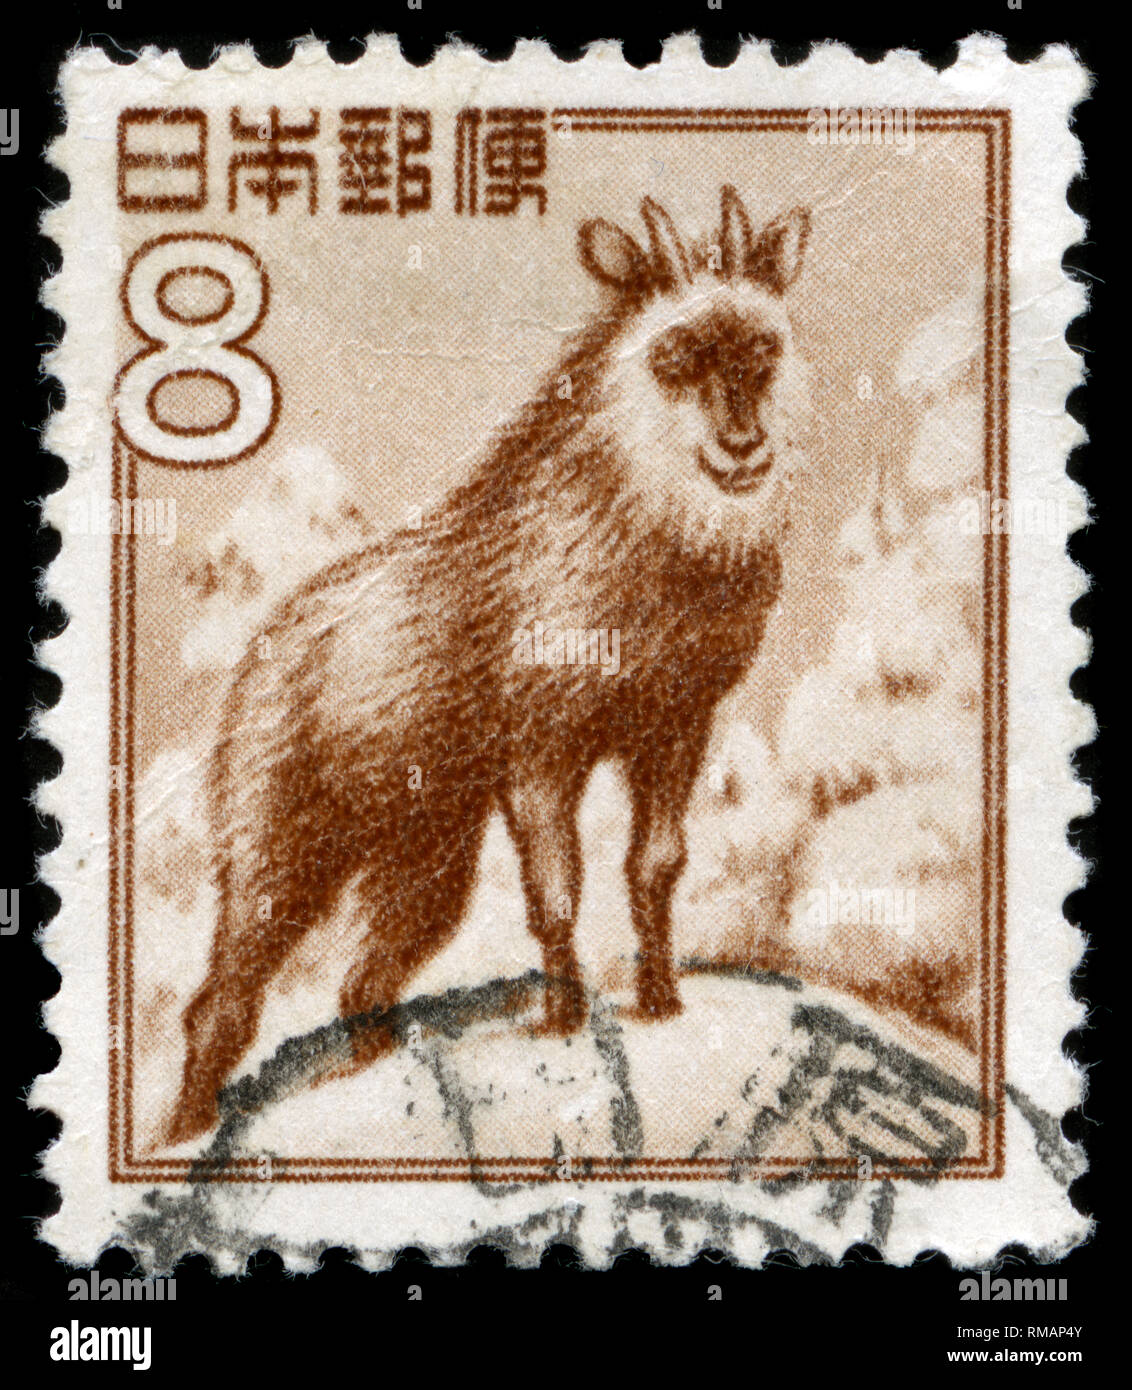 Postage stamp from Japan in the Fauna, Flora and National Treasures (1952-68) series issued in 1952 Stock Photo